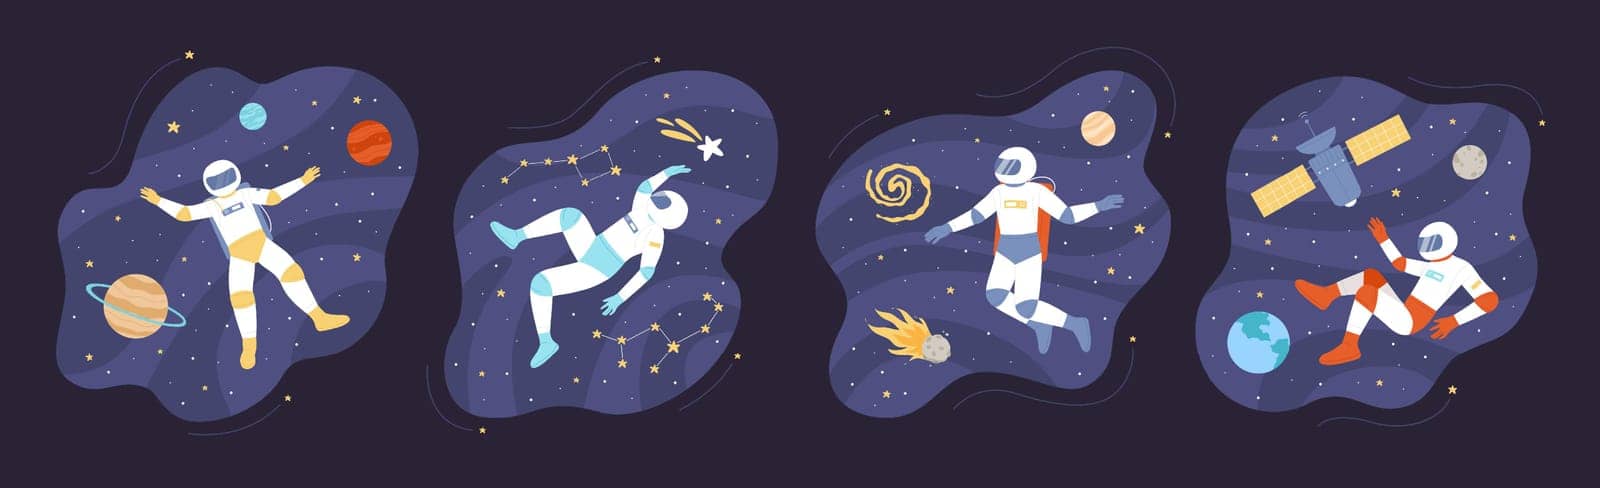 Astronauts floating in space in different poses set vector illustration. Cartoon spaceman in helmet and spacesuit flying between satellite and planets of solar system, shooting star and asteroid